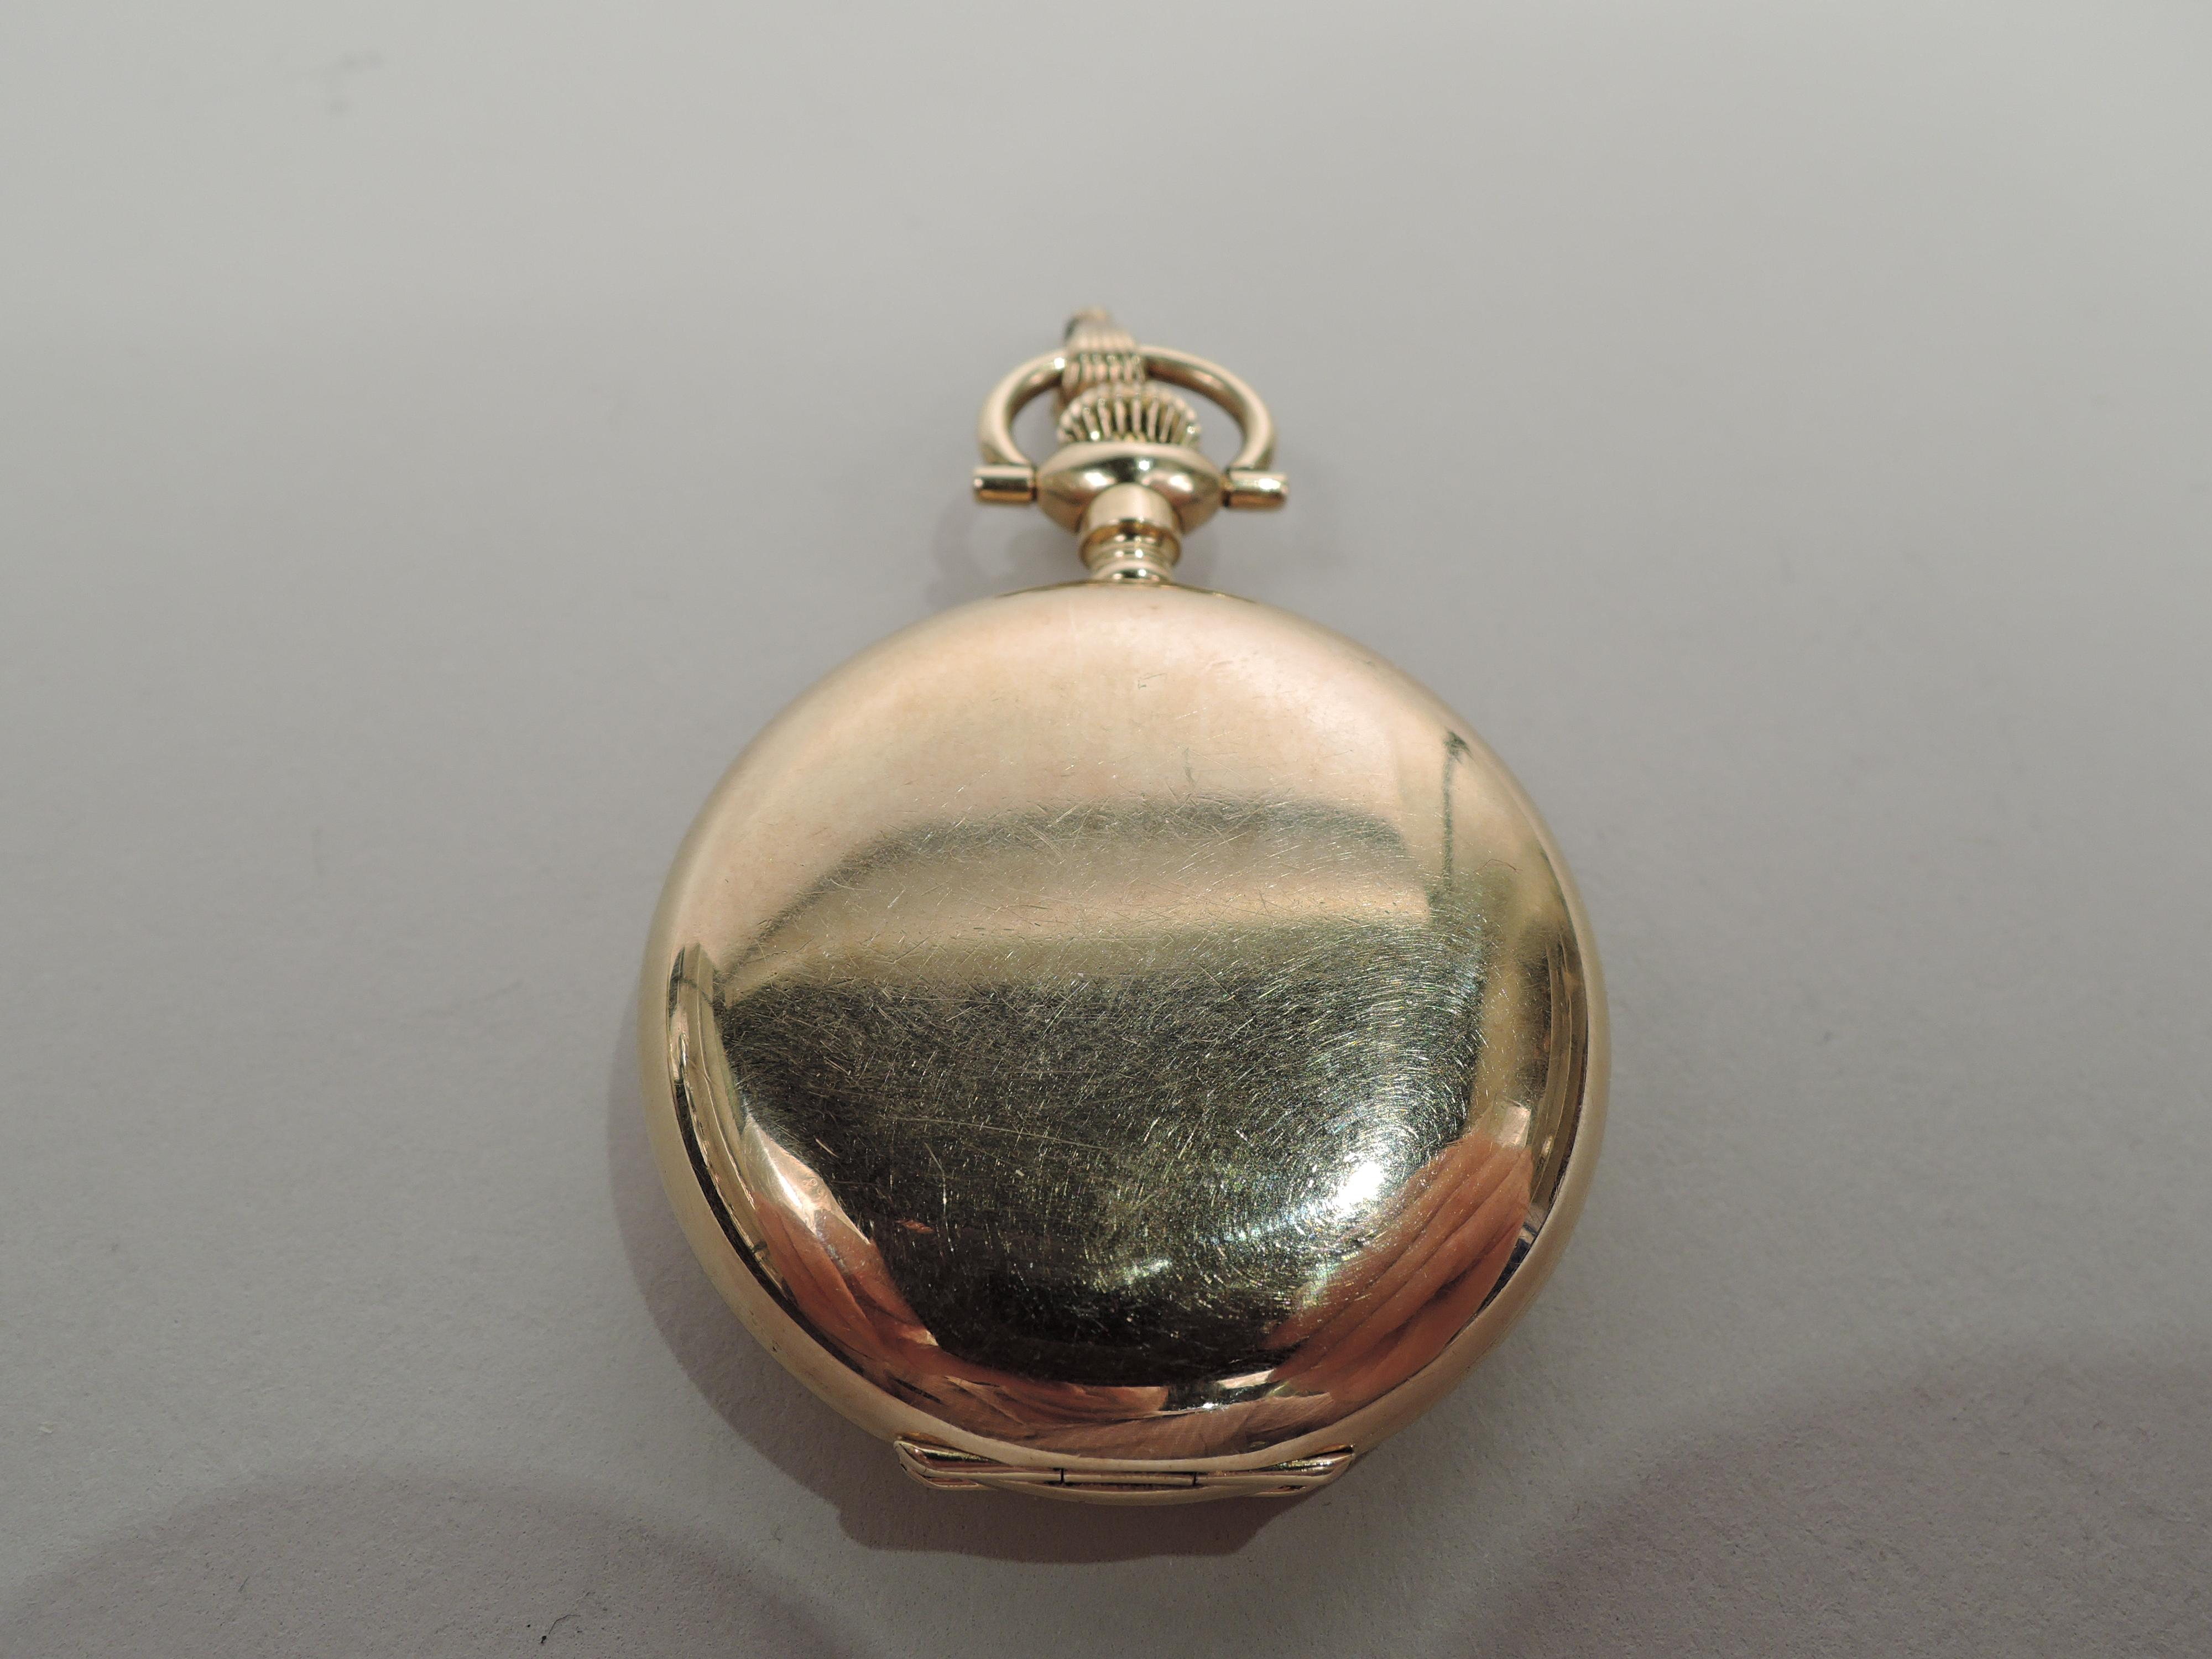 Edwardian 14k yellow gold pendant watch. Round and hinged. Engraved butterfly inlaid with 10 rose-cut diamonds and two ruby beads for exophthalmic eyes. United States, ca 1900. 